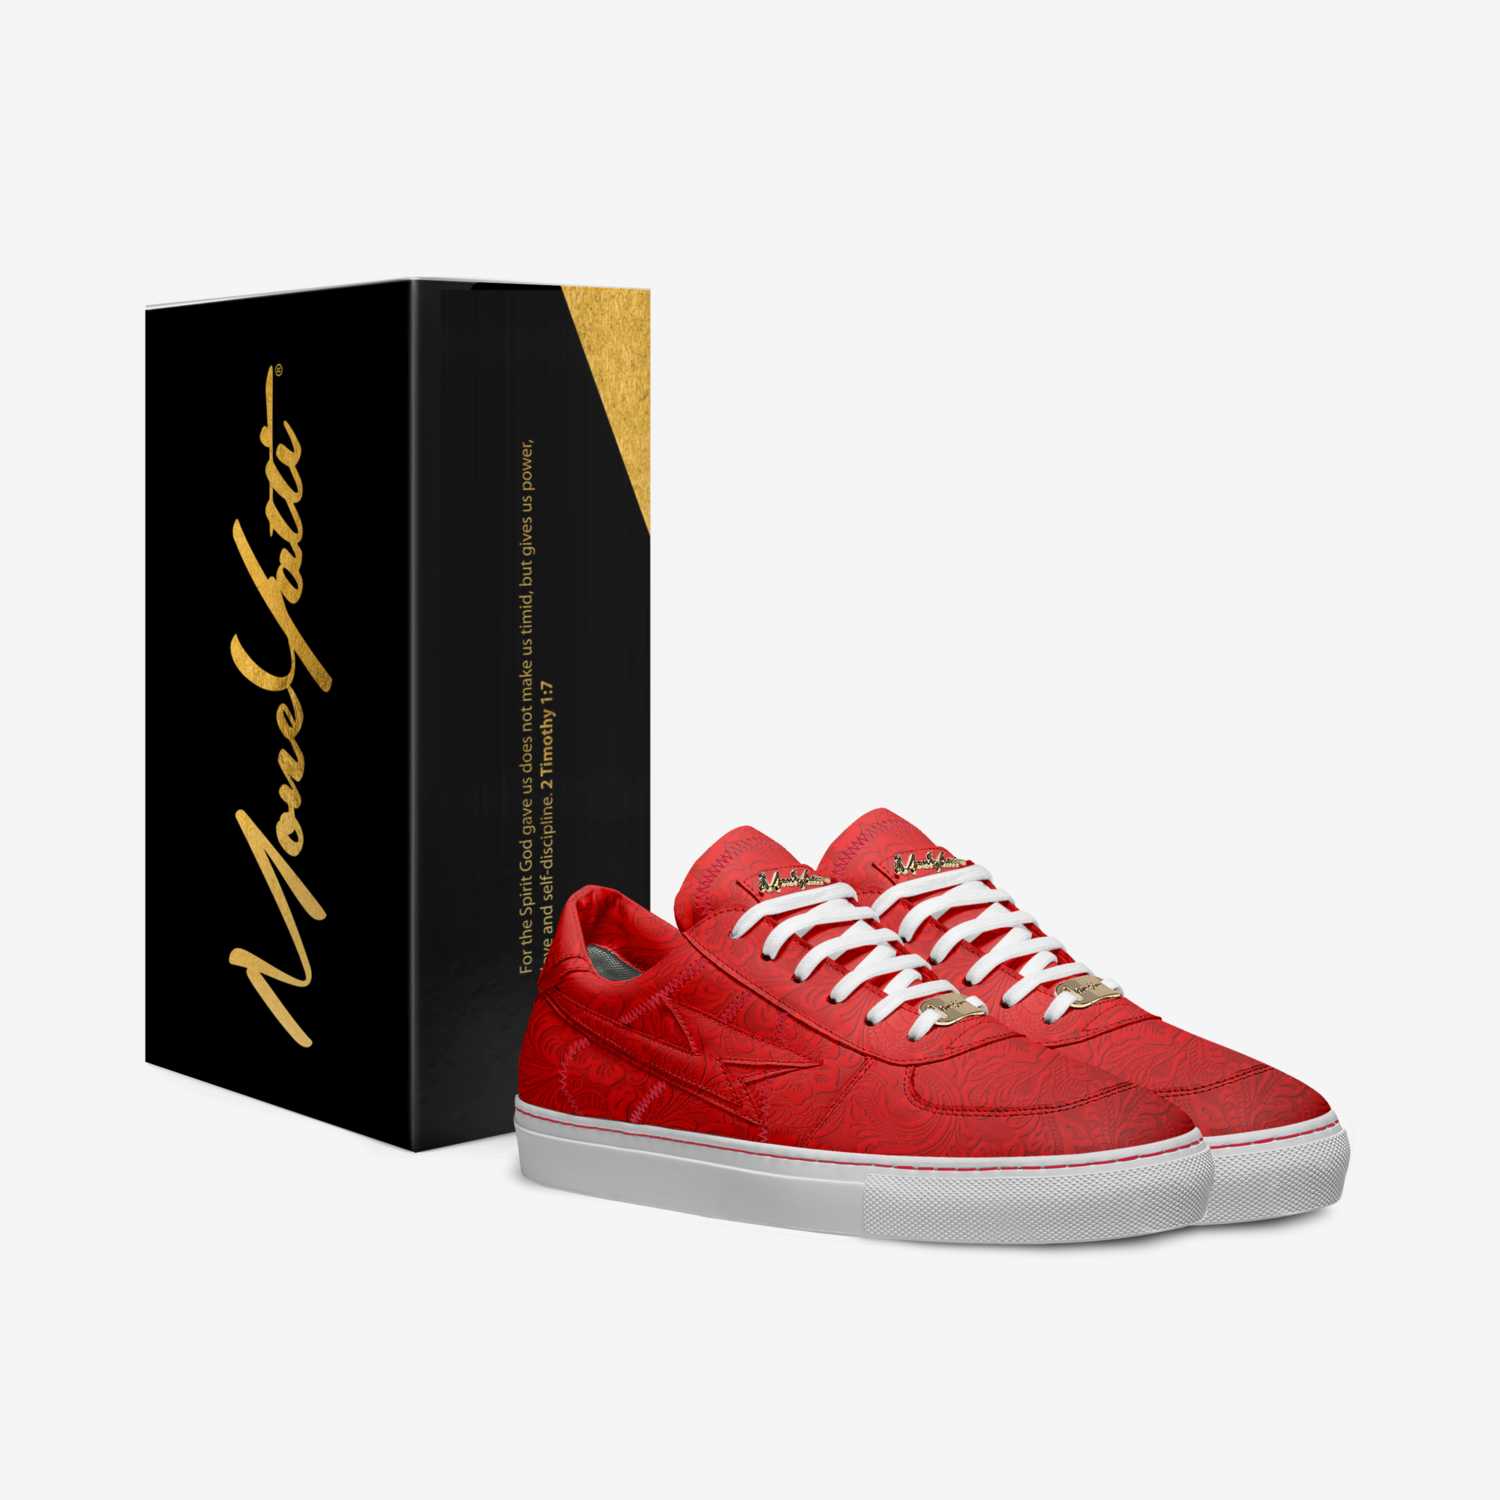 Masterpiece 081 custom made in Italy shoes by Moneyatti Brand | Box view